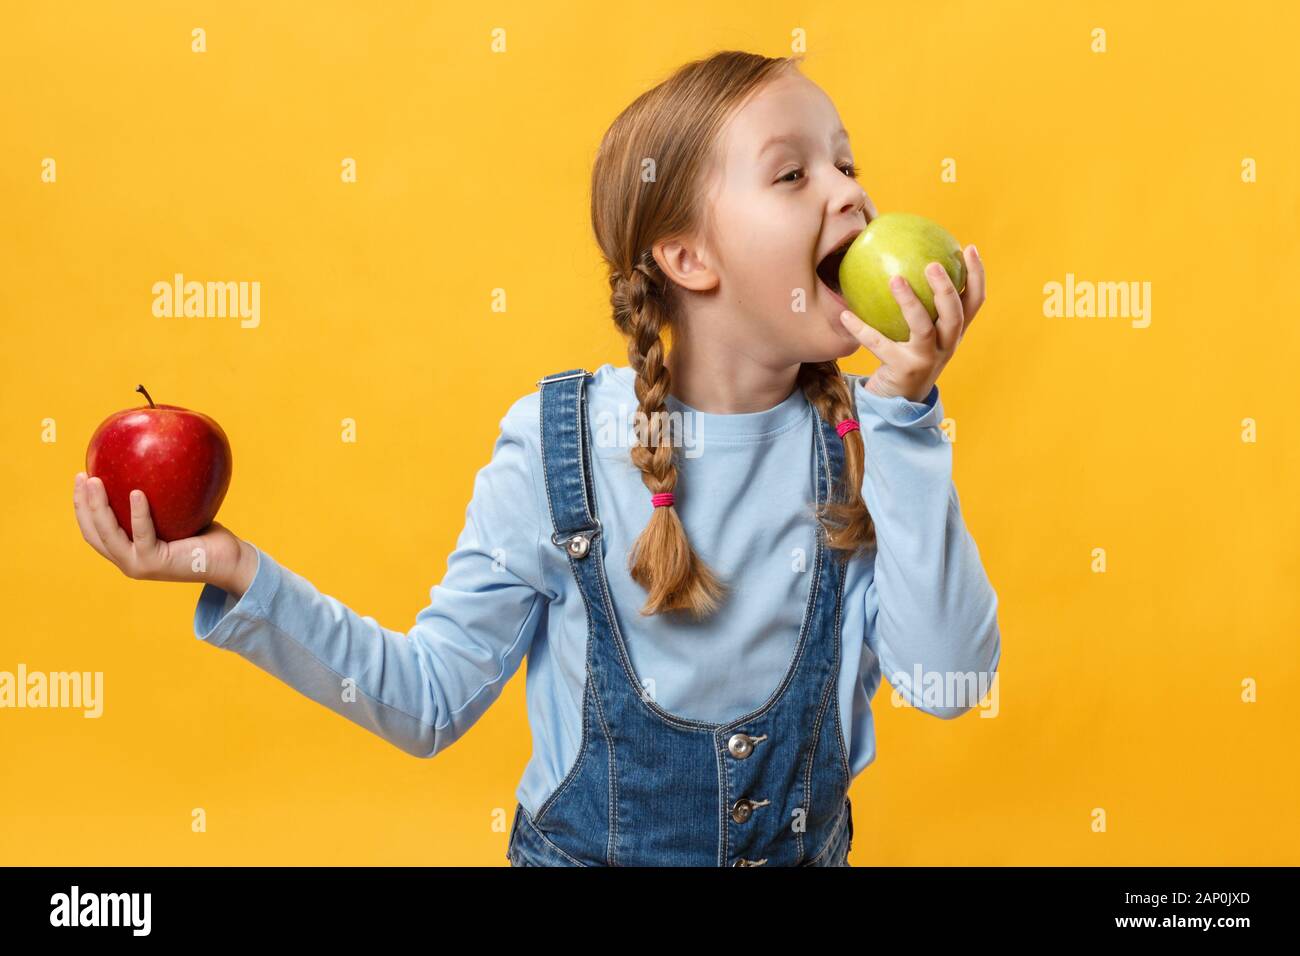 Healthy eating concept. A child bites an apple. Little girl on a yellow background. Stock Photo